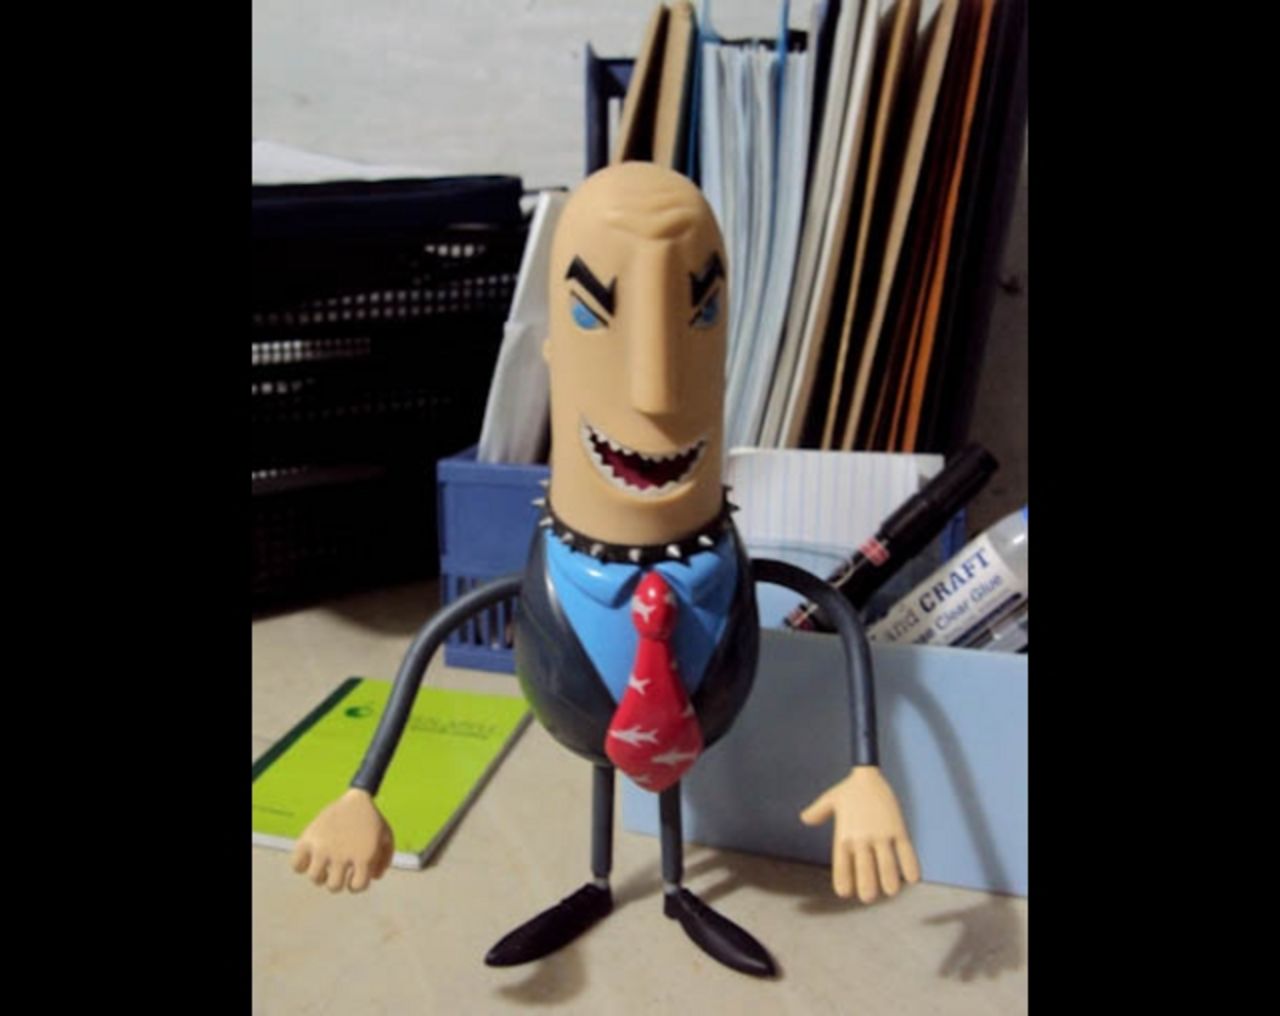 A little plastic shark in a pinstripe suit works wonders for 22 year old Philippines college student <a href="http://ireport.cnn.com/docs/DOC-830904" target="_blank">Clyde Antes</a>' motivational levels. "Whenever I feel bored or tired while working, I'll just look at my toy and it makes me laugh," he says. "You talkin' to me, Sharkbait?", Antes makes the toy say.  And, "Pro bono? Never heard of him".